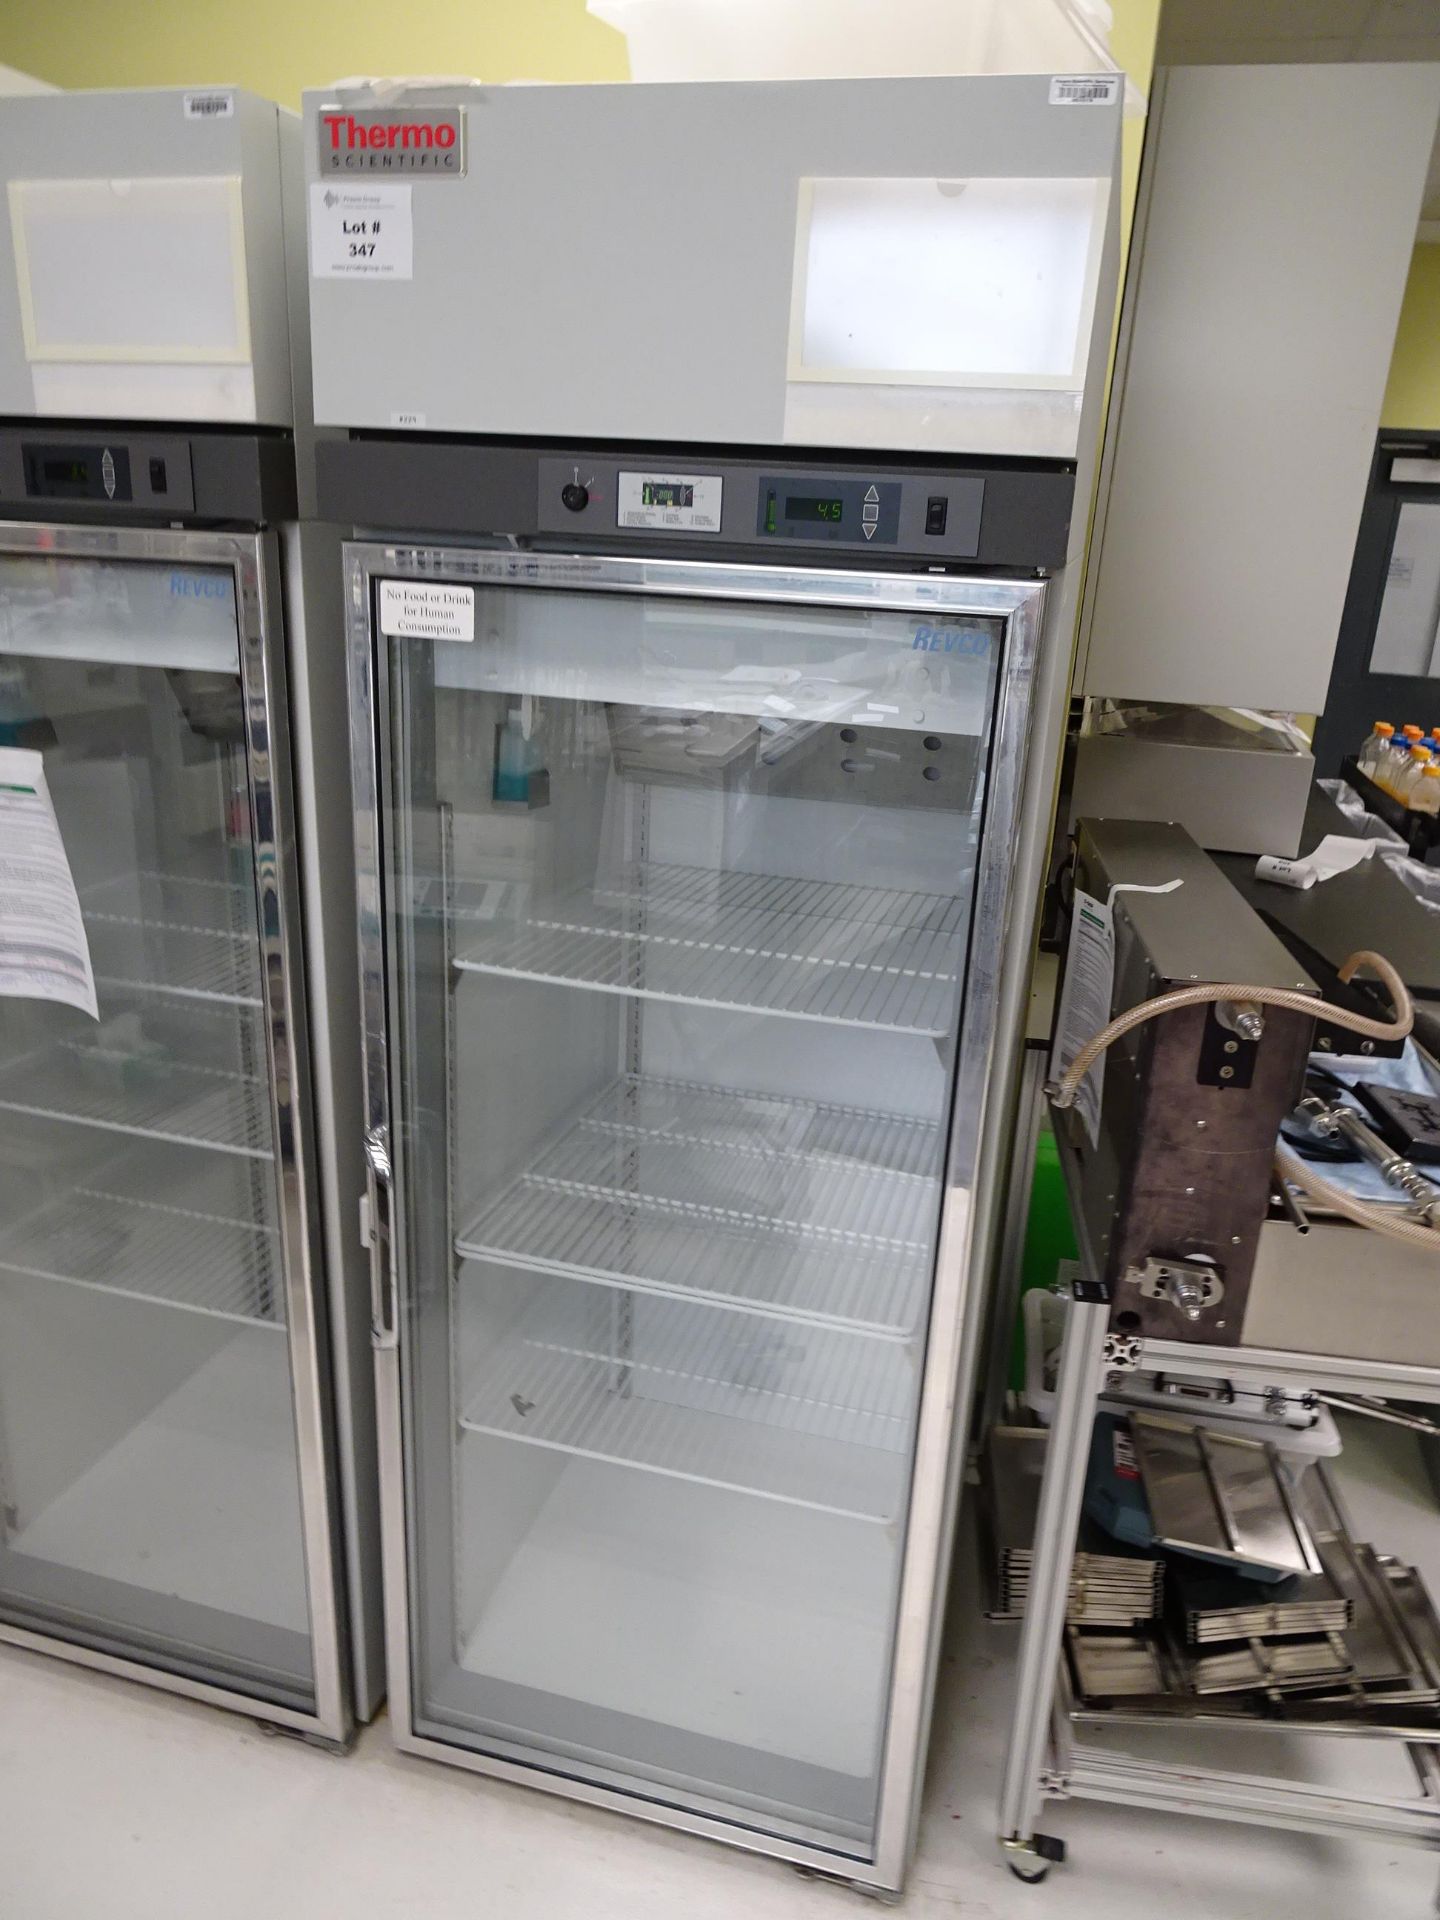 Thermo Fisher Scientific Model REL2304A21 Single Glass Door Refrigerator with 4-Shelves, Item Number